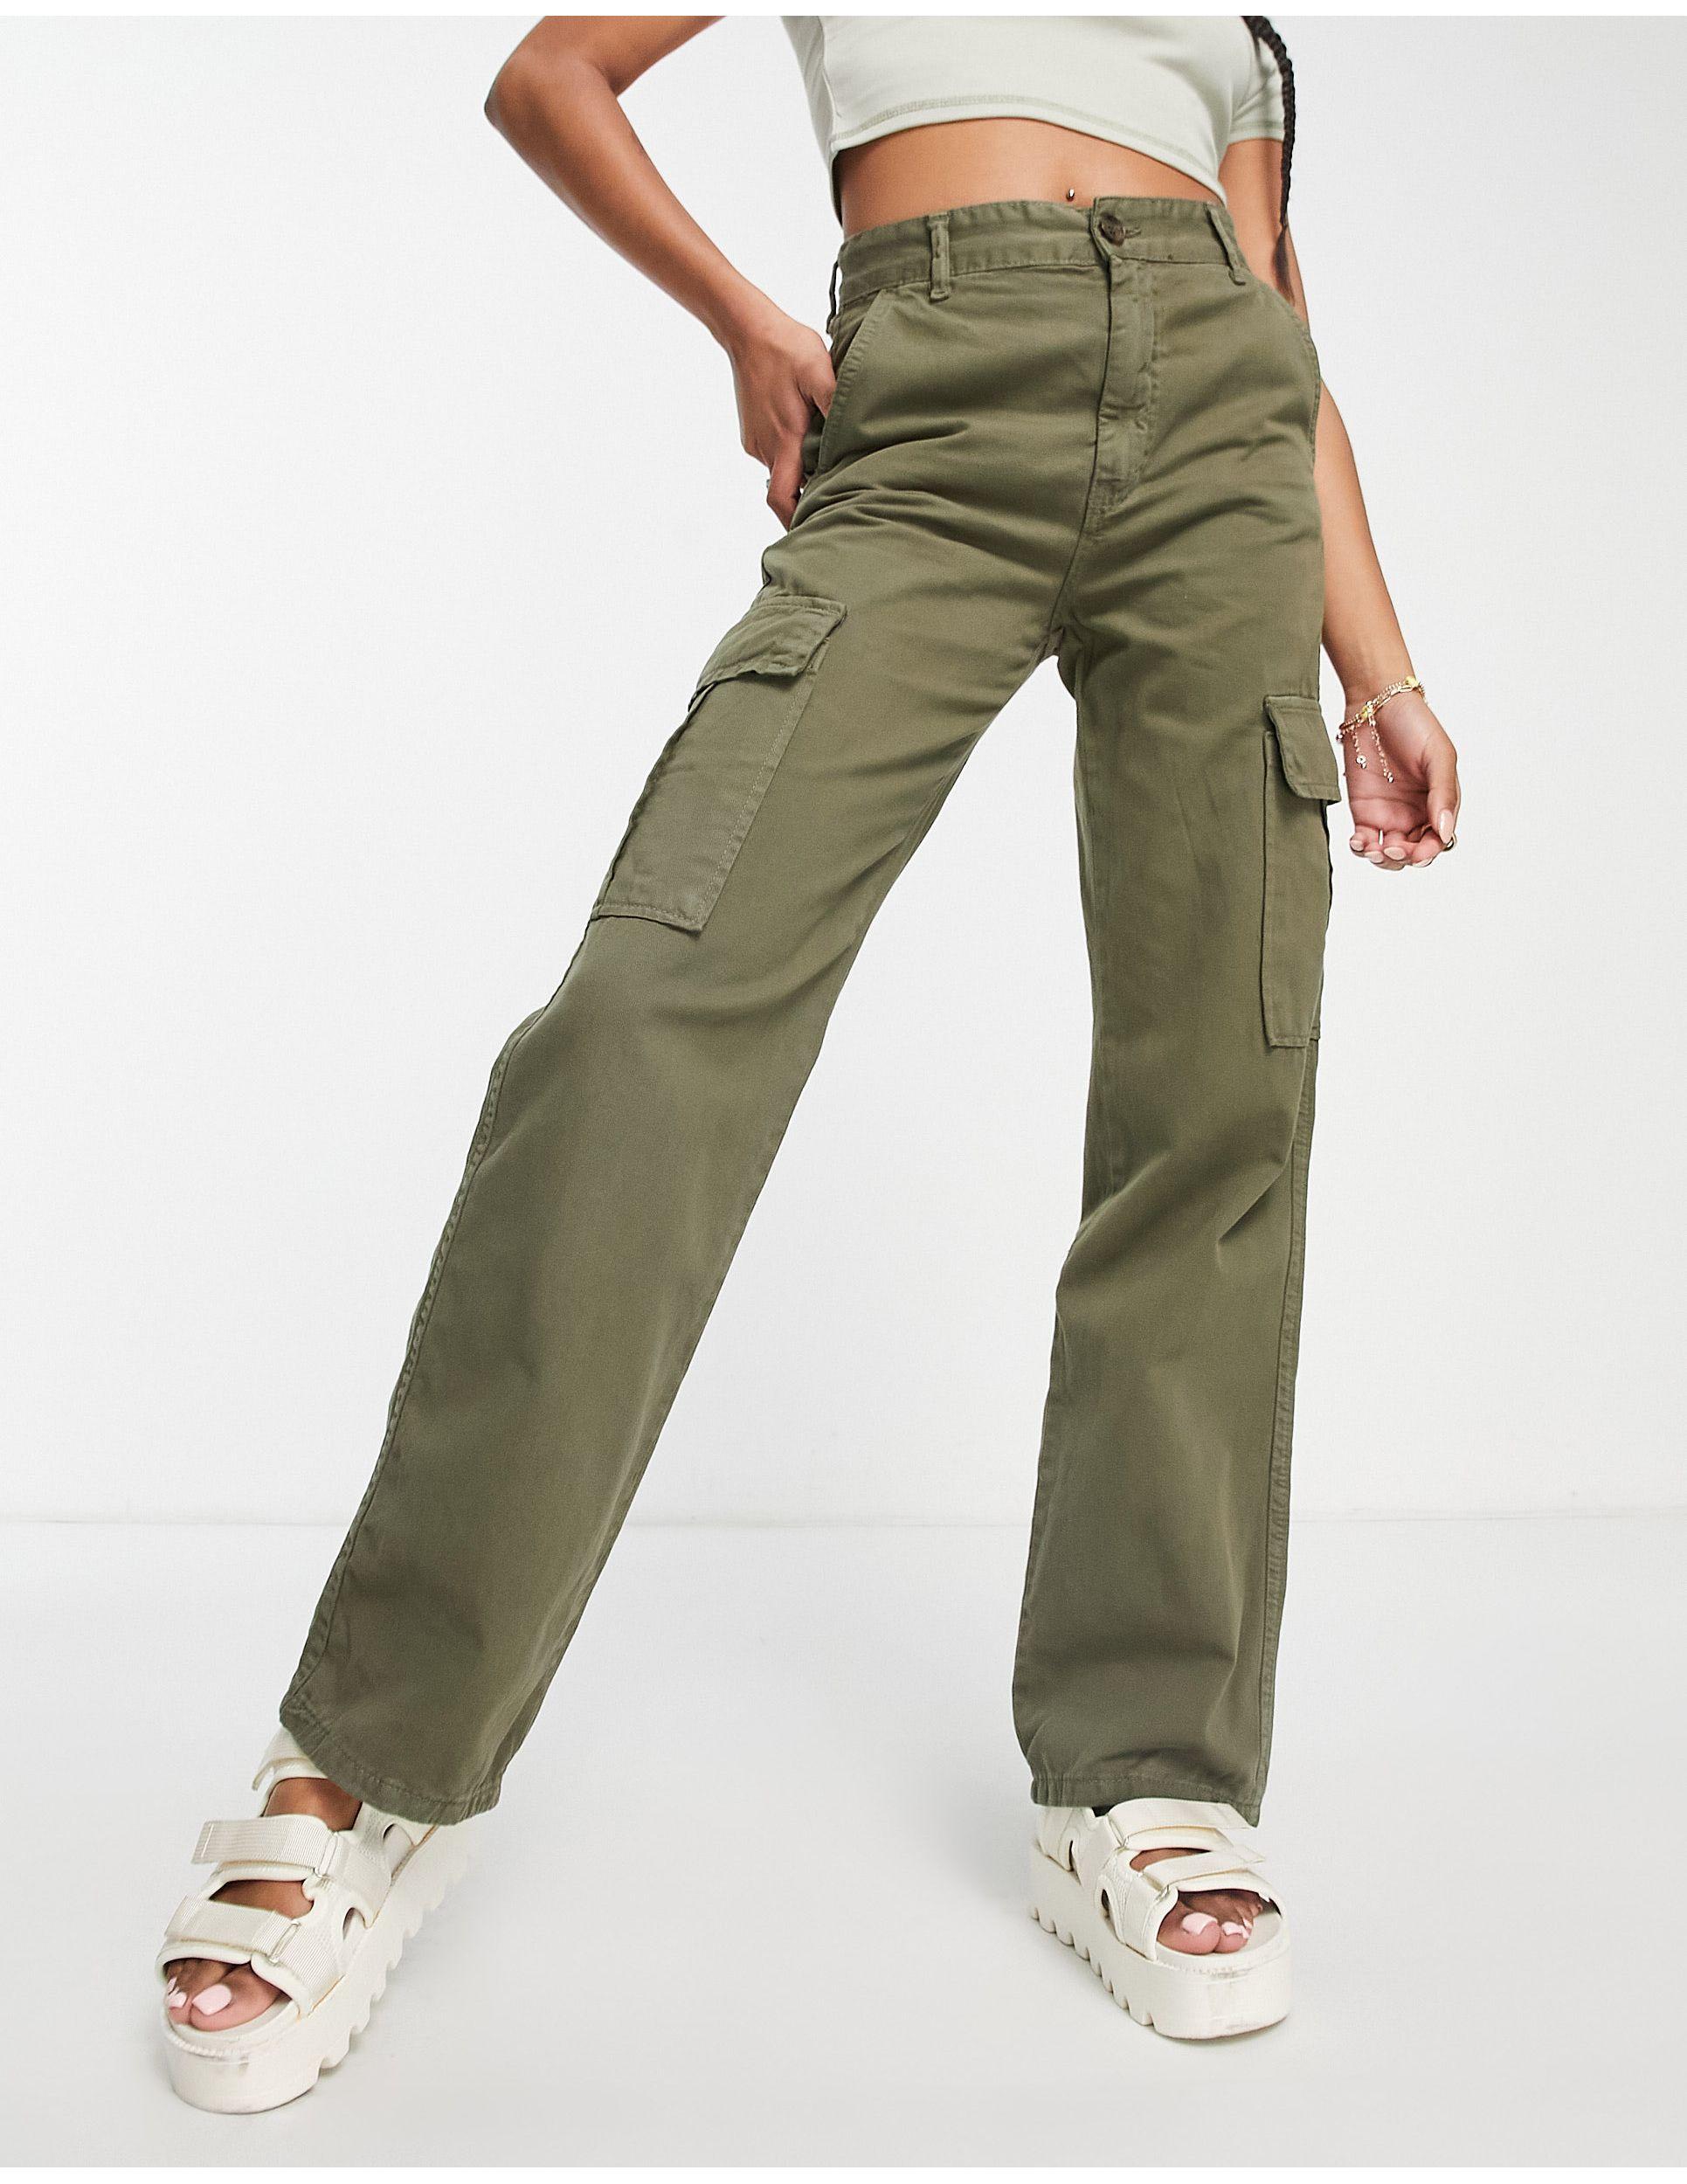 Stradivarius Str Tall Straight Leg Cargo Pants in Green Slacks and Chinos Cargo trousers Womens Clothing Trousers 